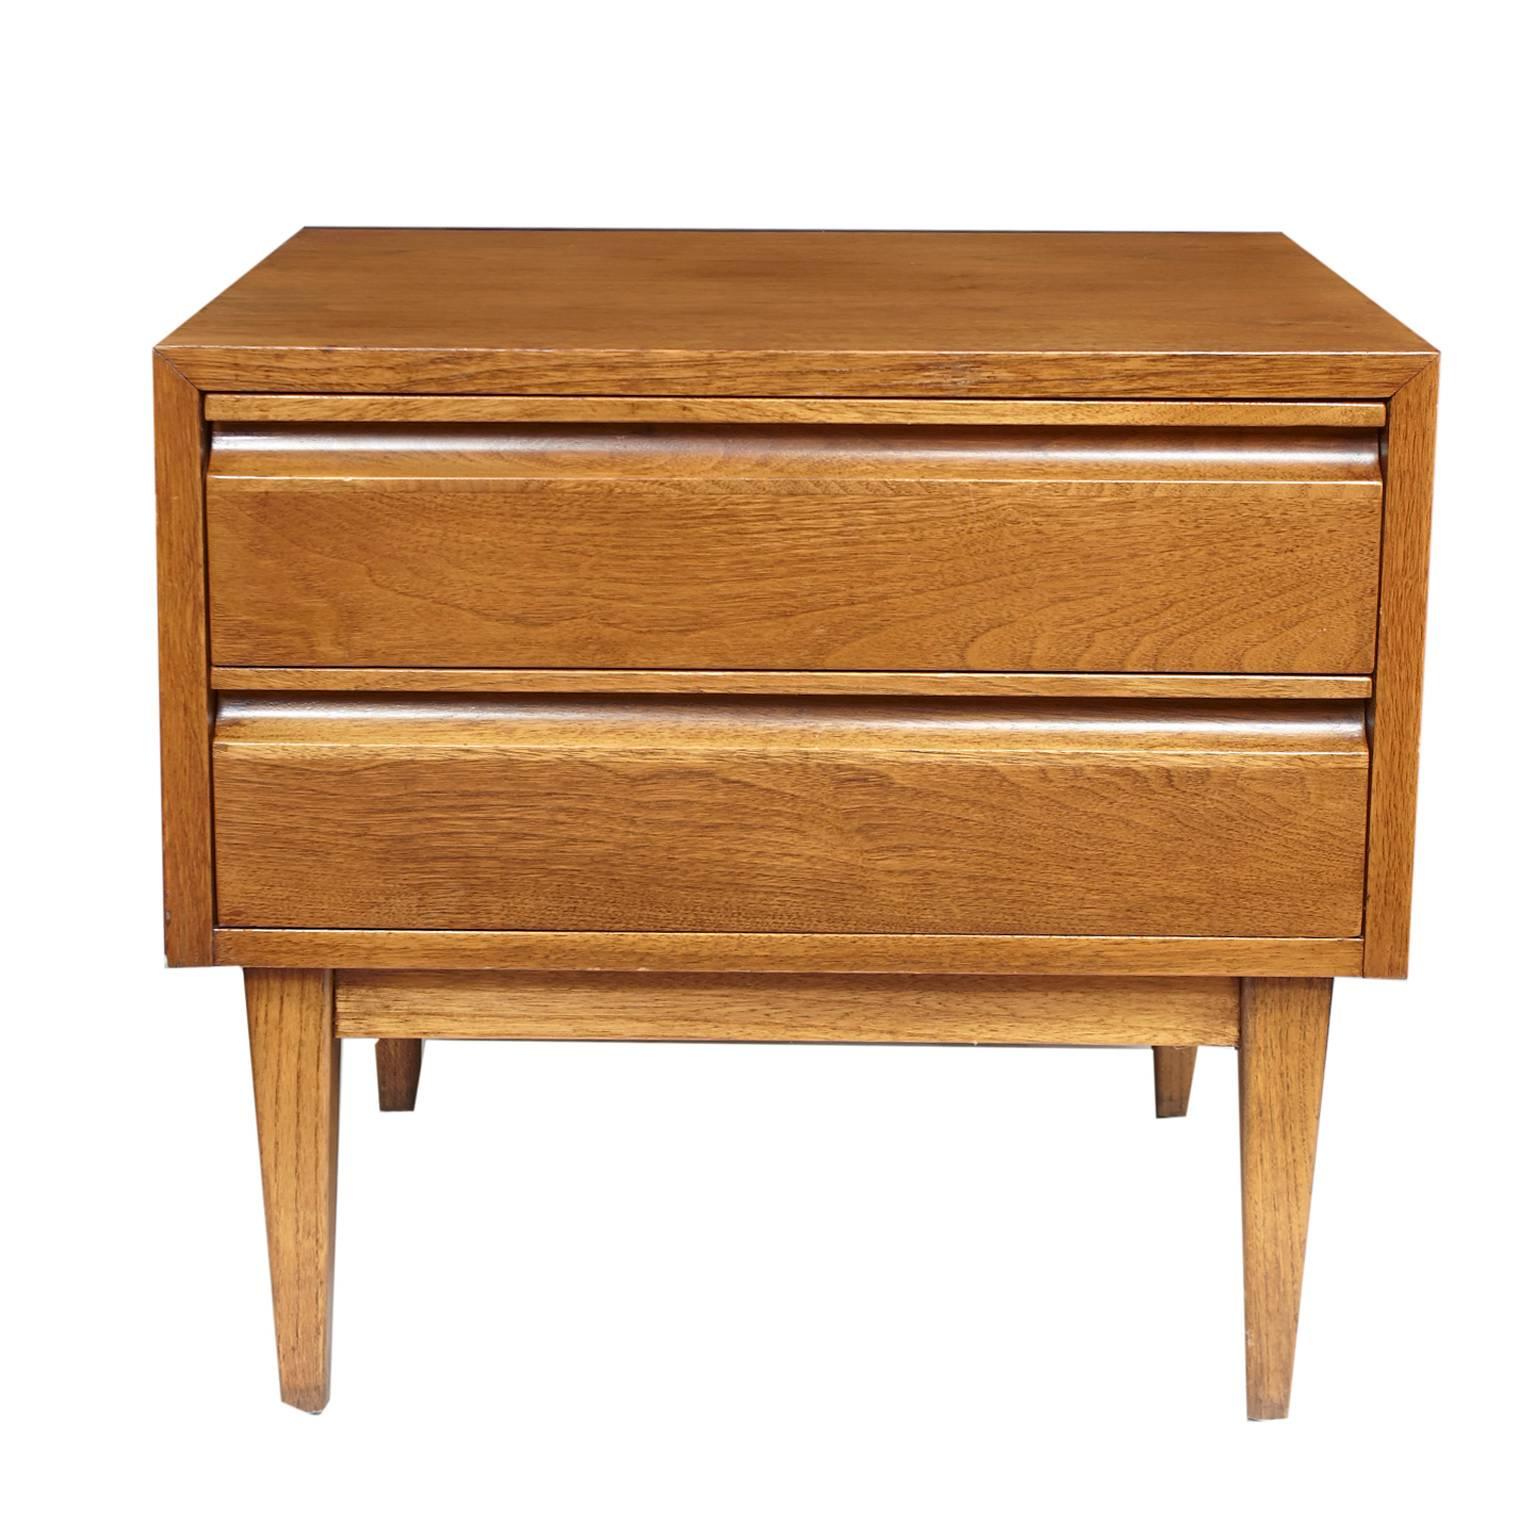 Great pair of American of Martinsville nightstands or end tables.